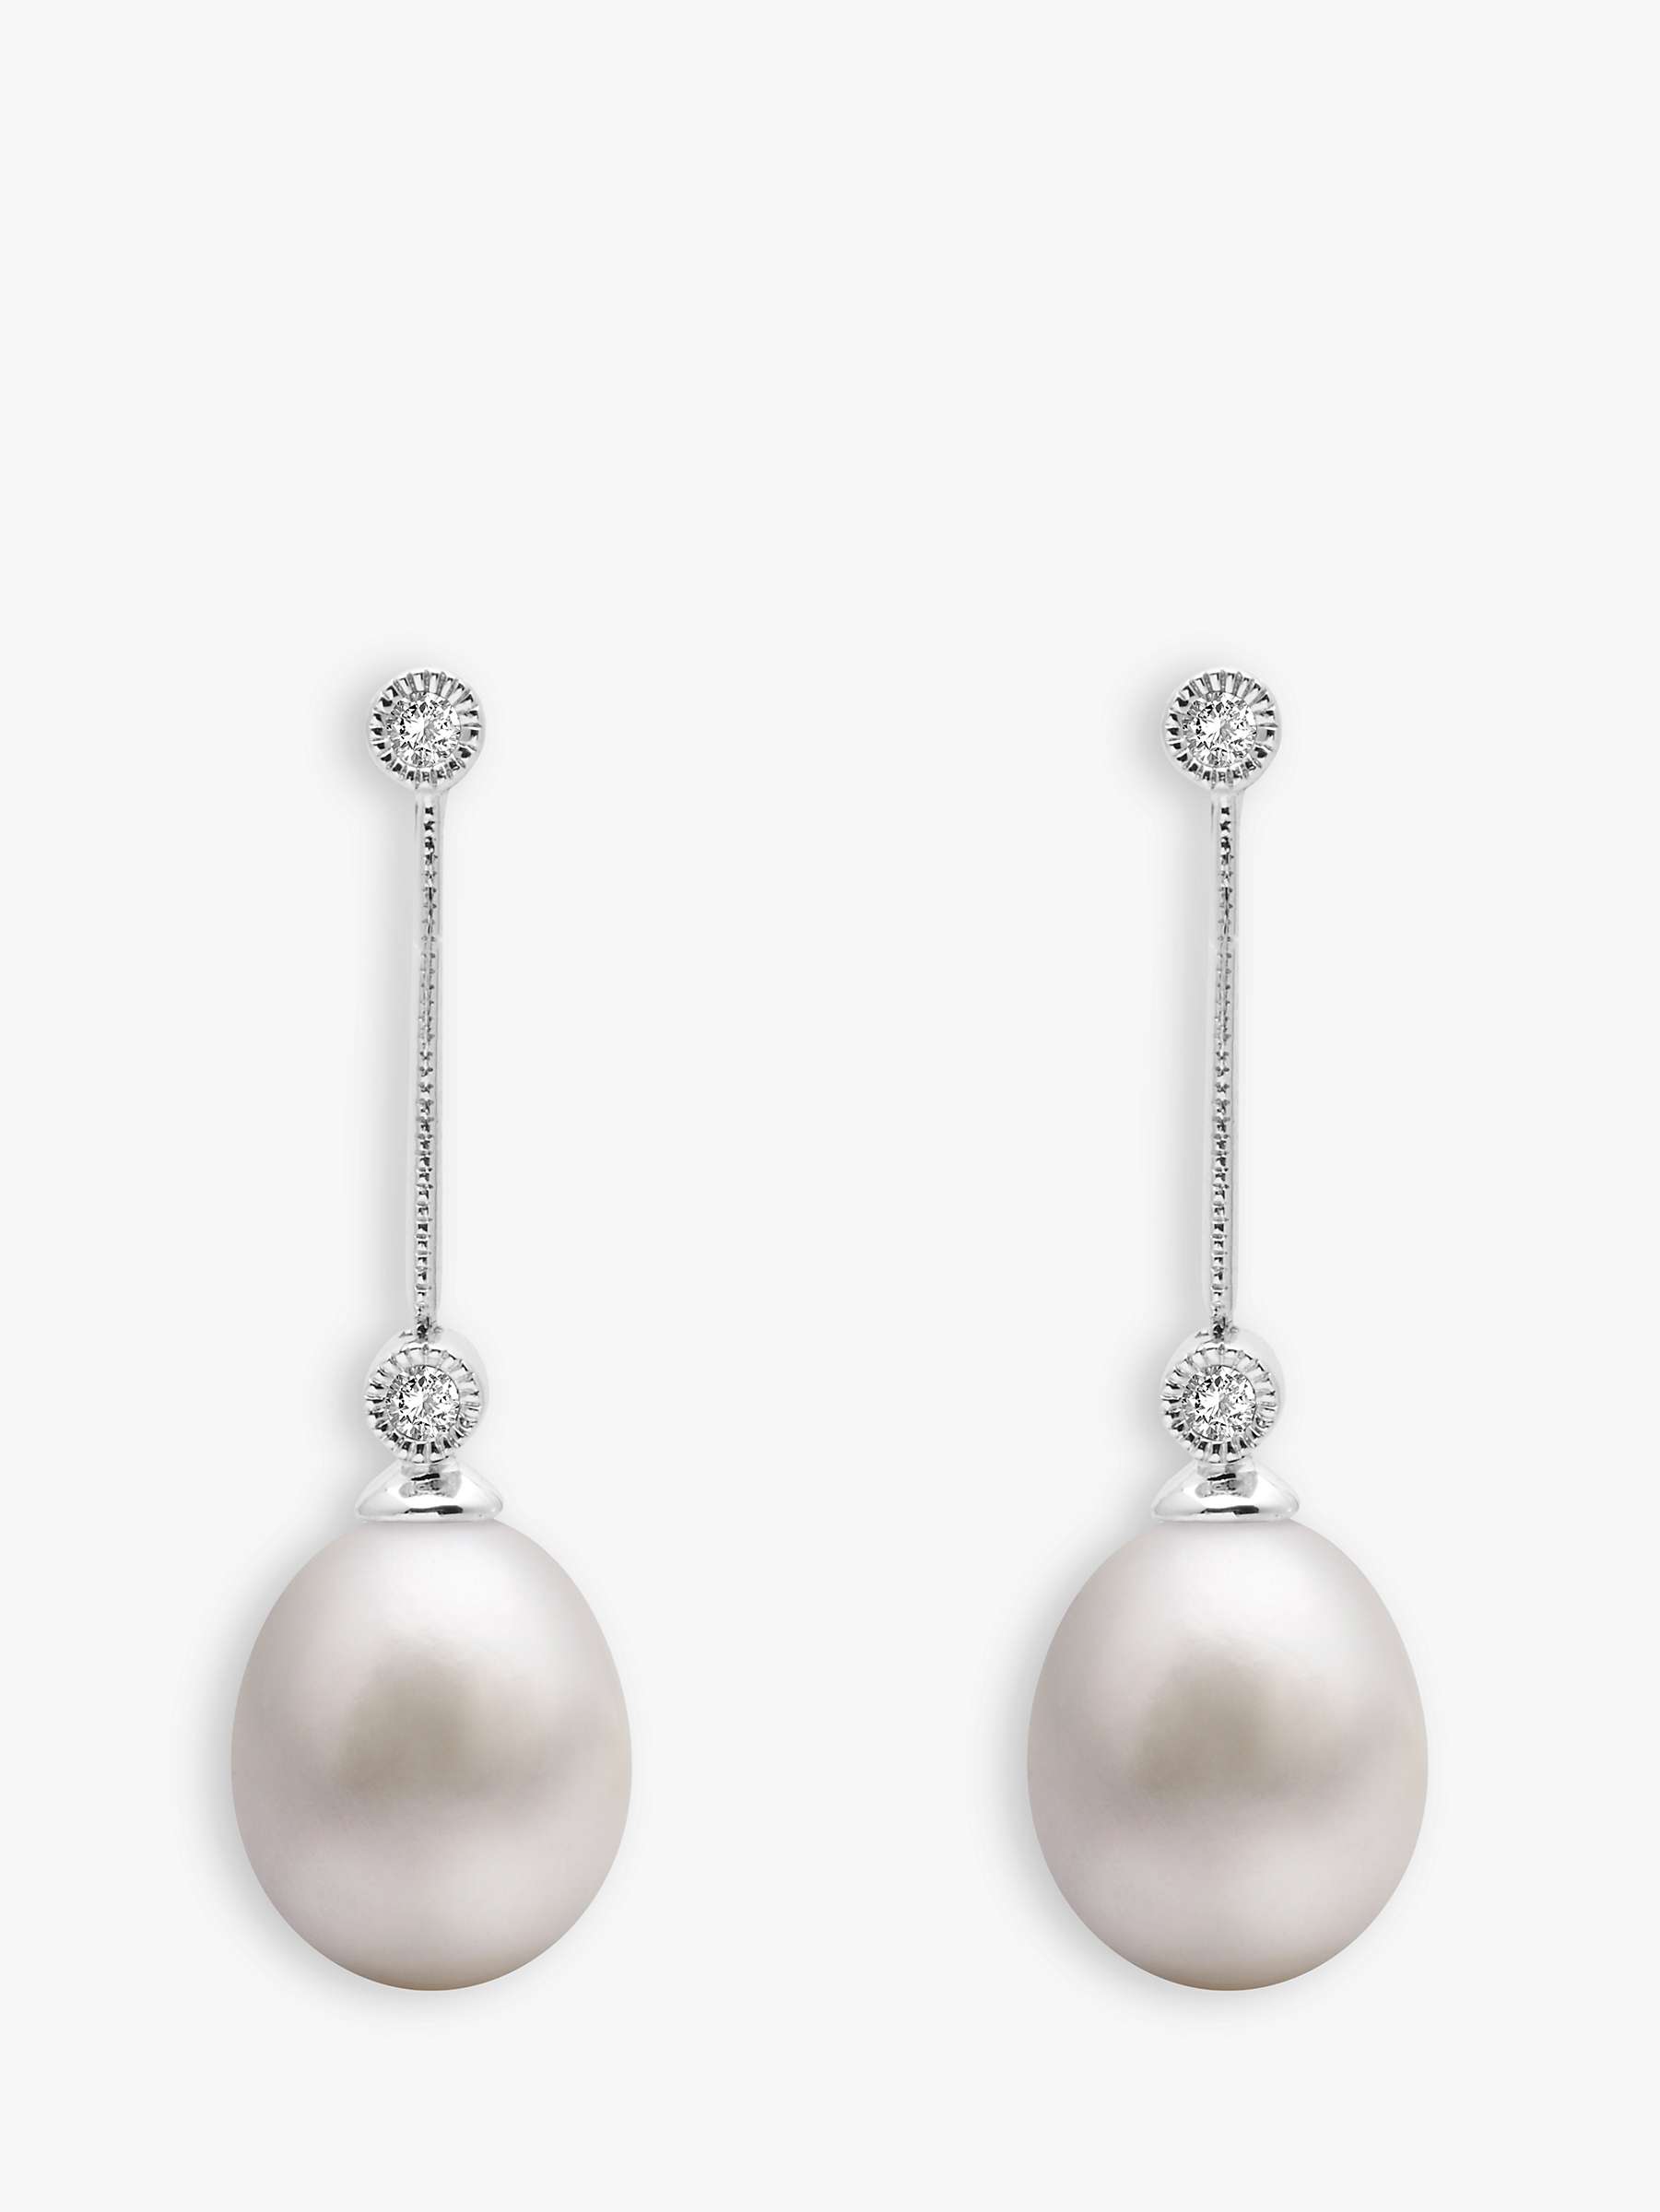 Buy A B Davis 9ct White Gold Freshwater Pearl and Diamond Chain Drop Earrings Online at johnlewis.com